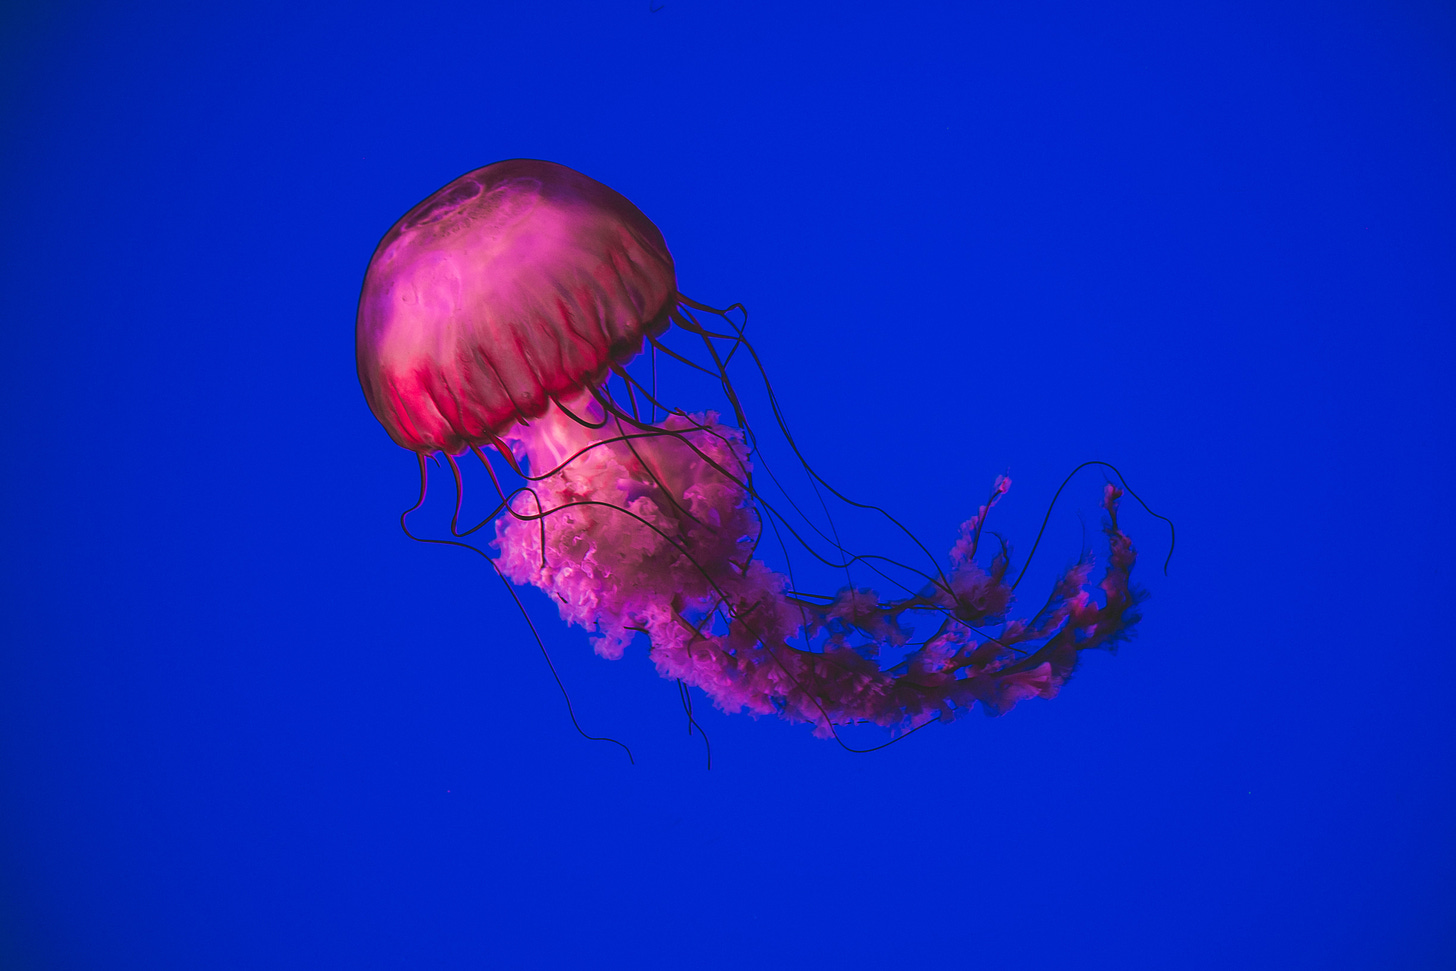 A pink and red jellyfish swimming in deep blue water